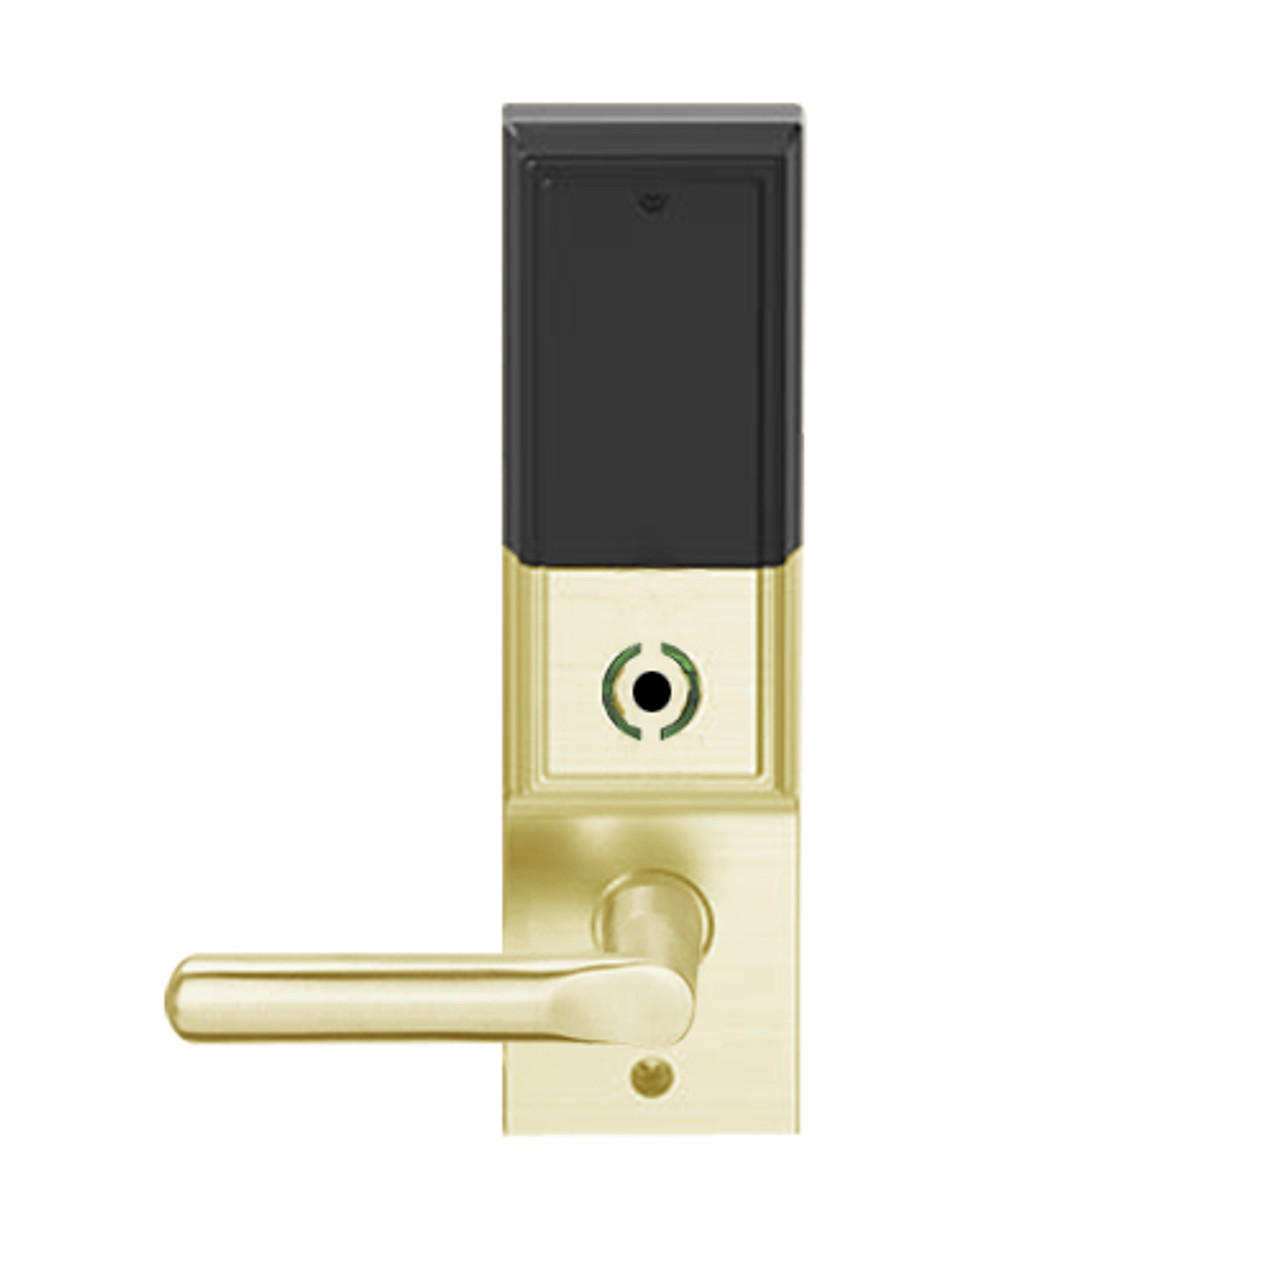 LEMB-ADD-J-18-606 Schlage Privacy/Office Wireless Addison Mortise Lock with Push Button, LED and 18 Lever Prepped for FSIC in Satin Brass